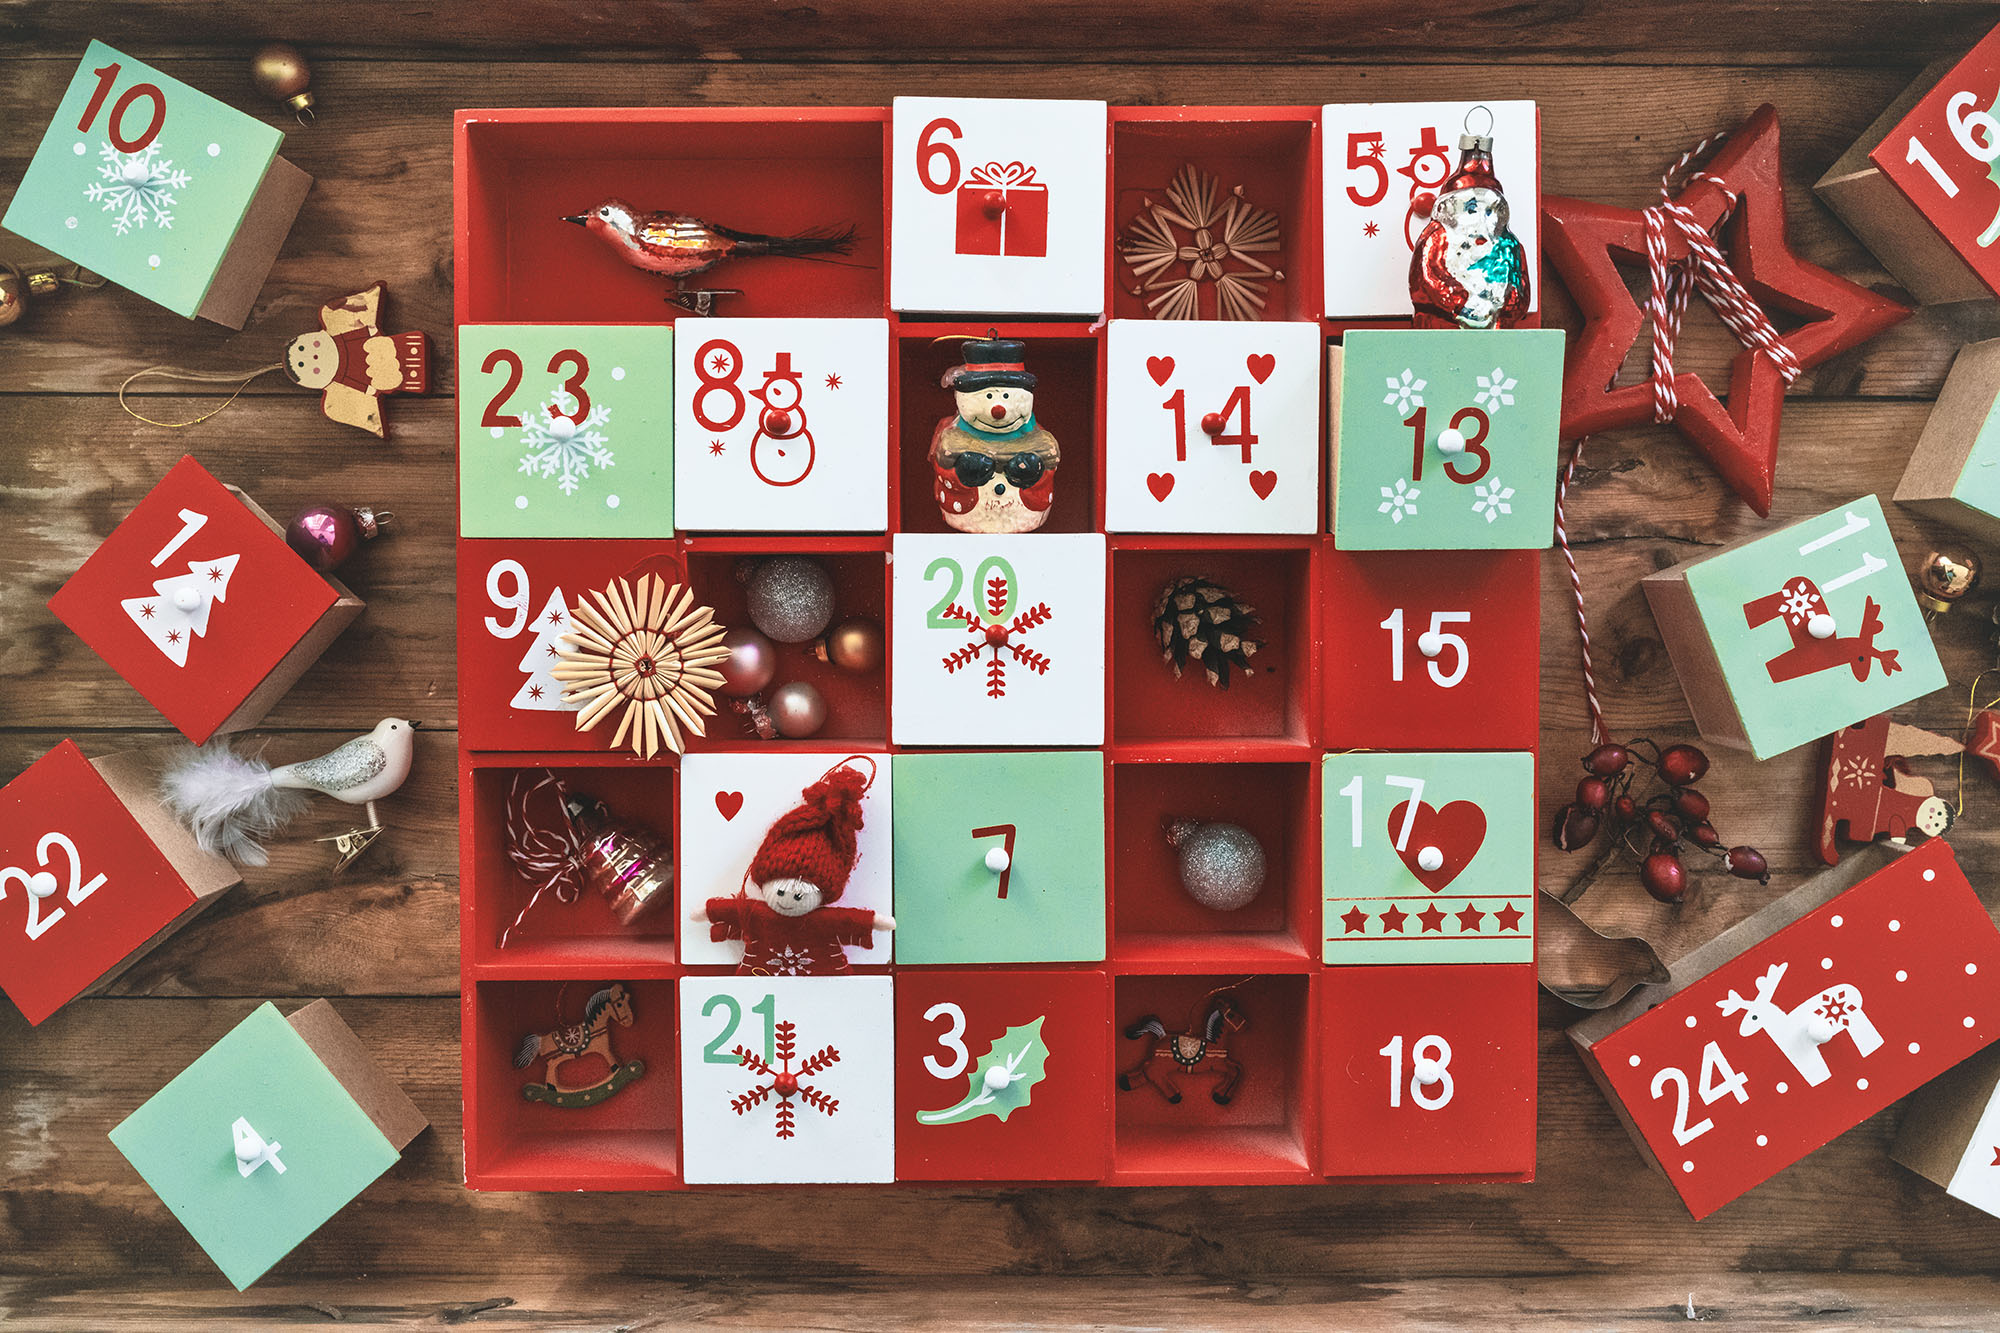 15 Fun and Festive Christmas Advent Calendars From